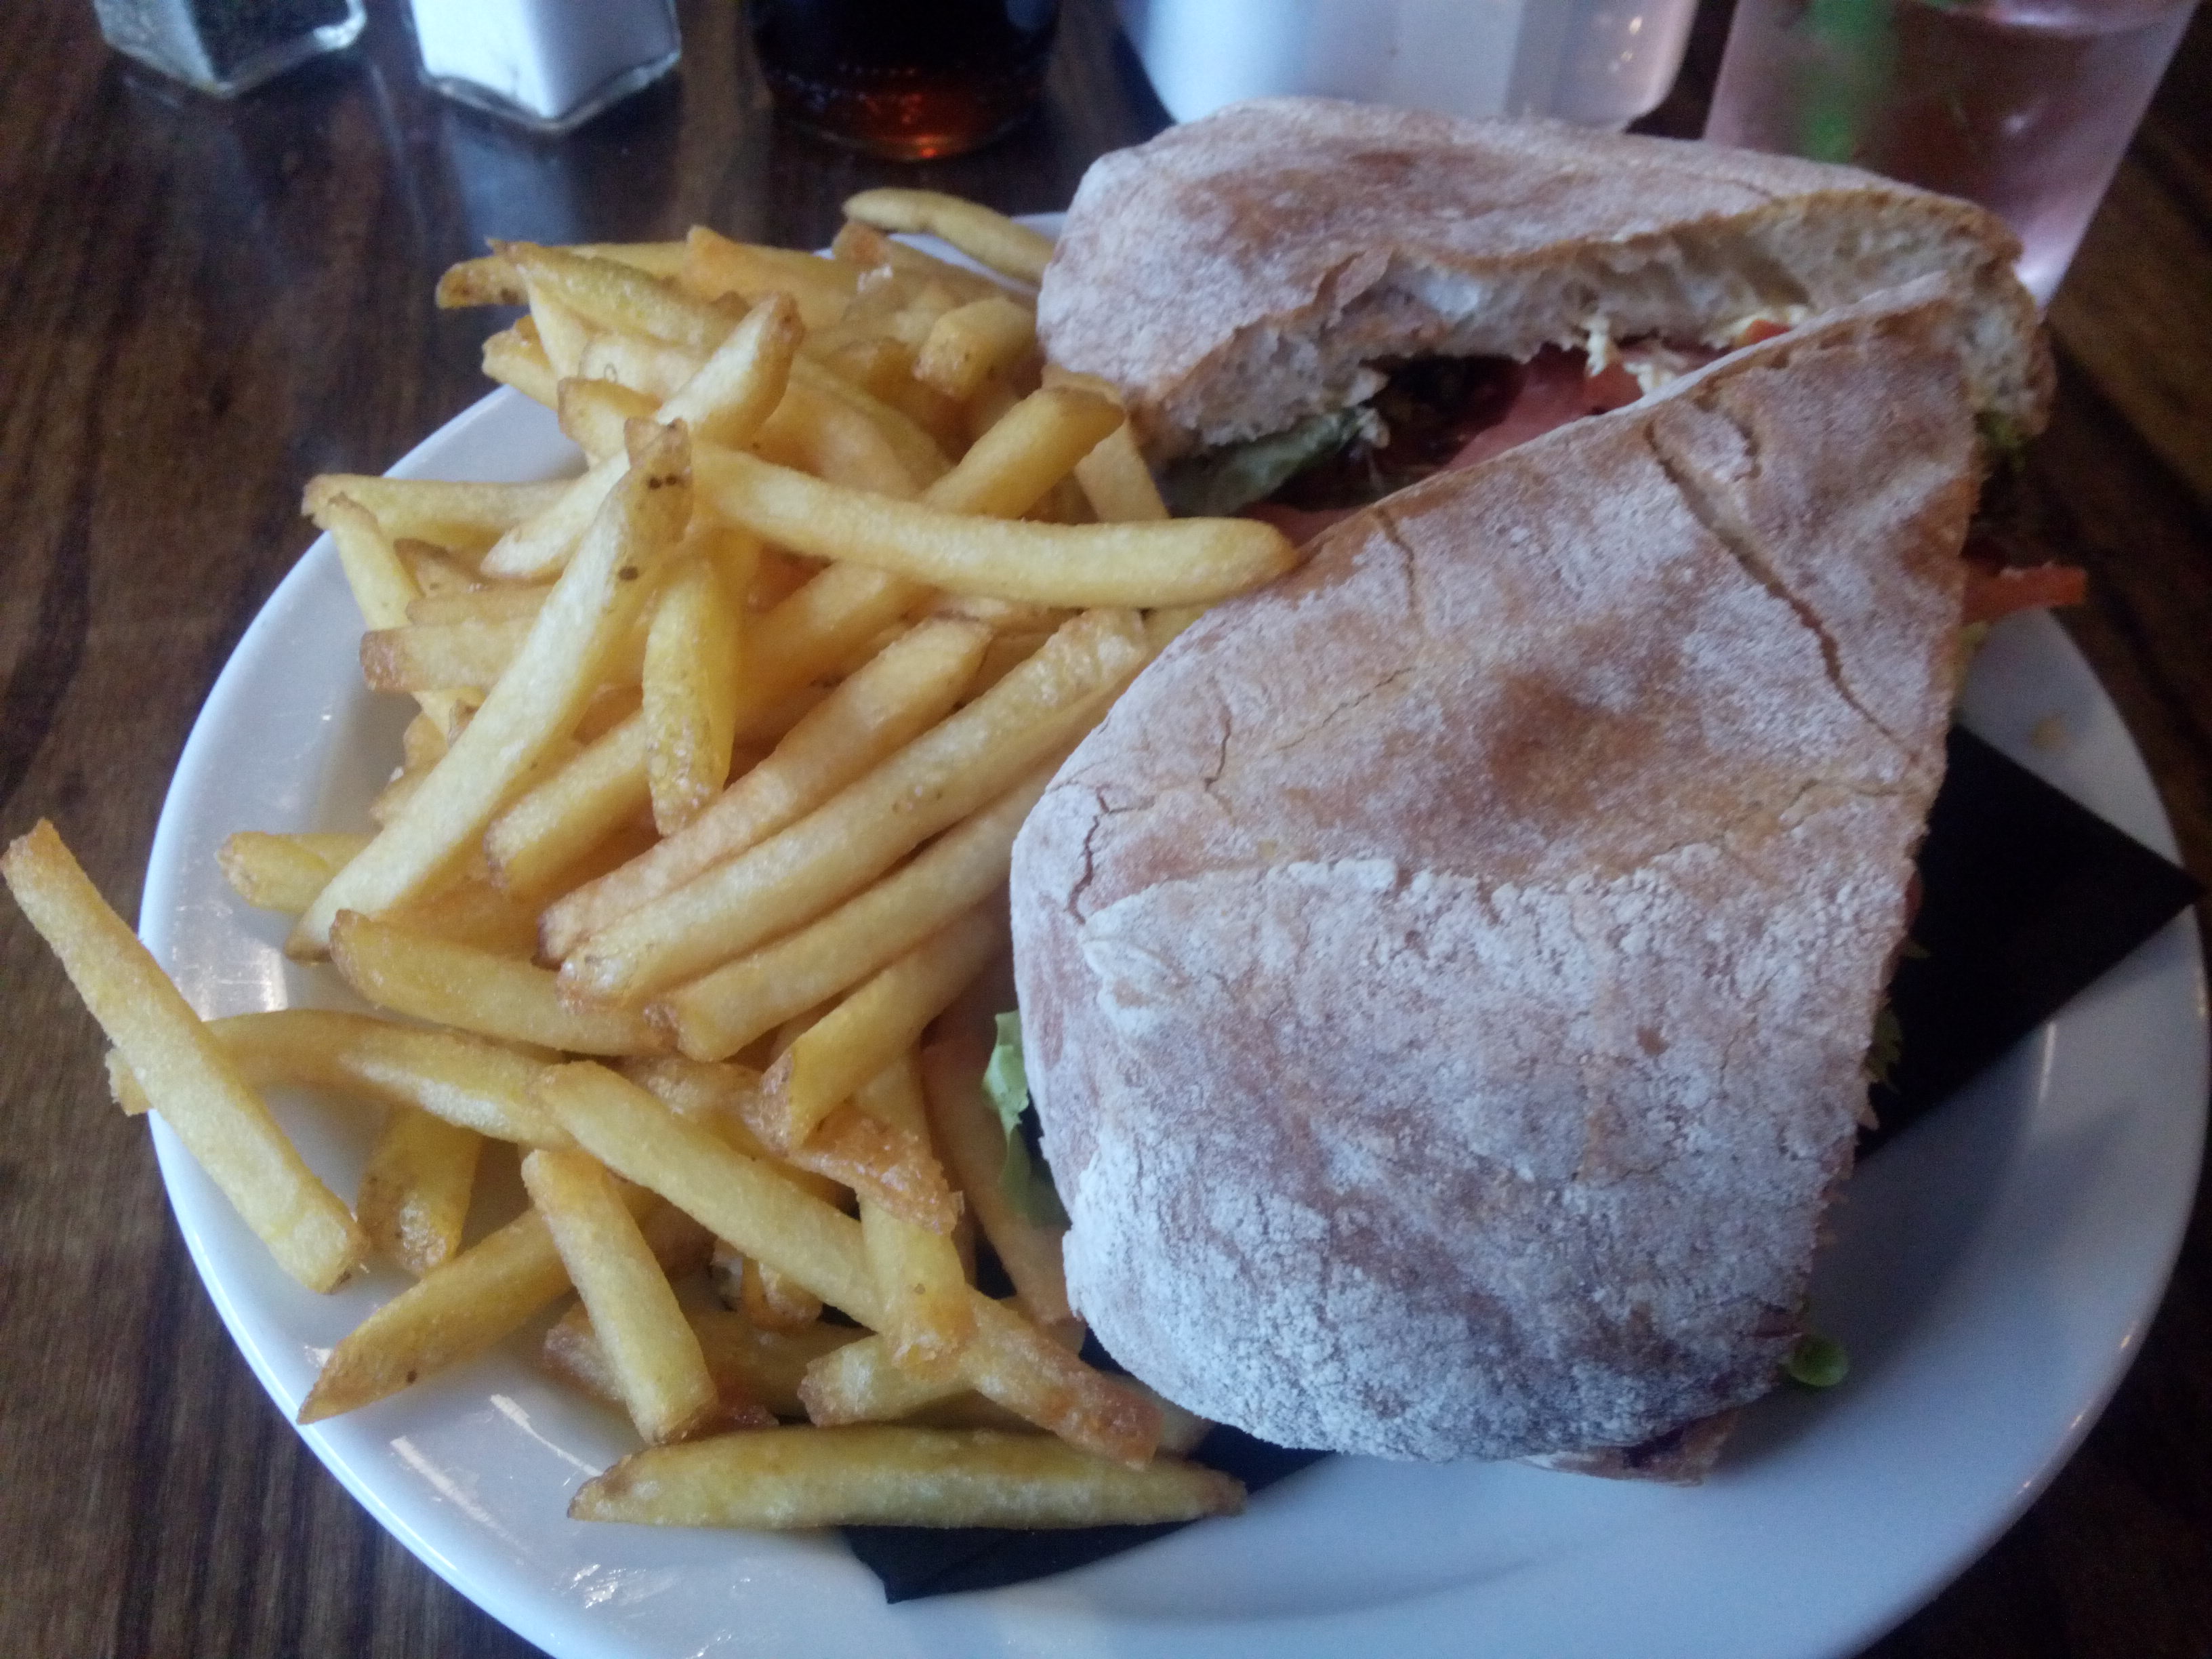 Thin fries and a panino on a plate